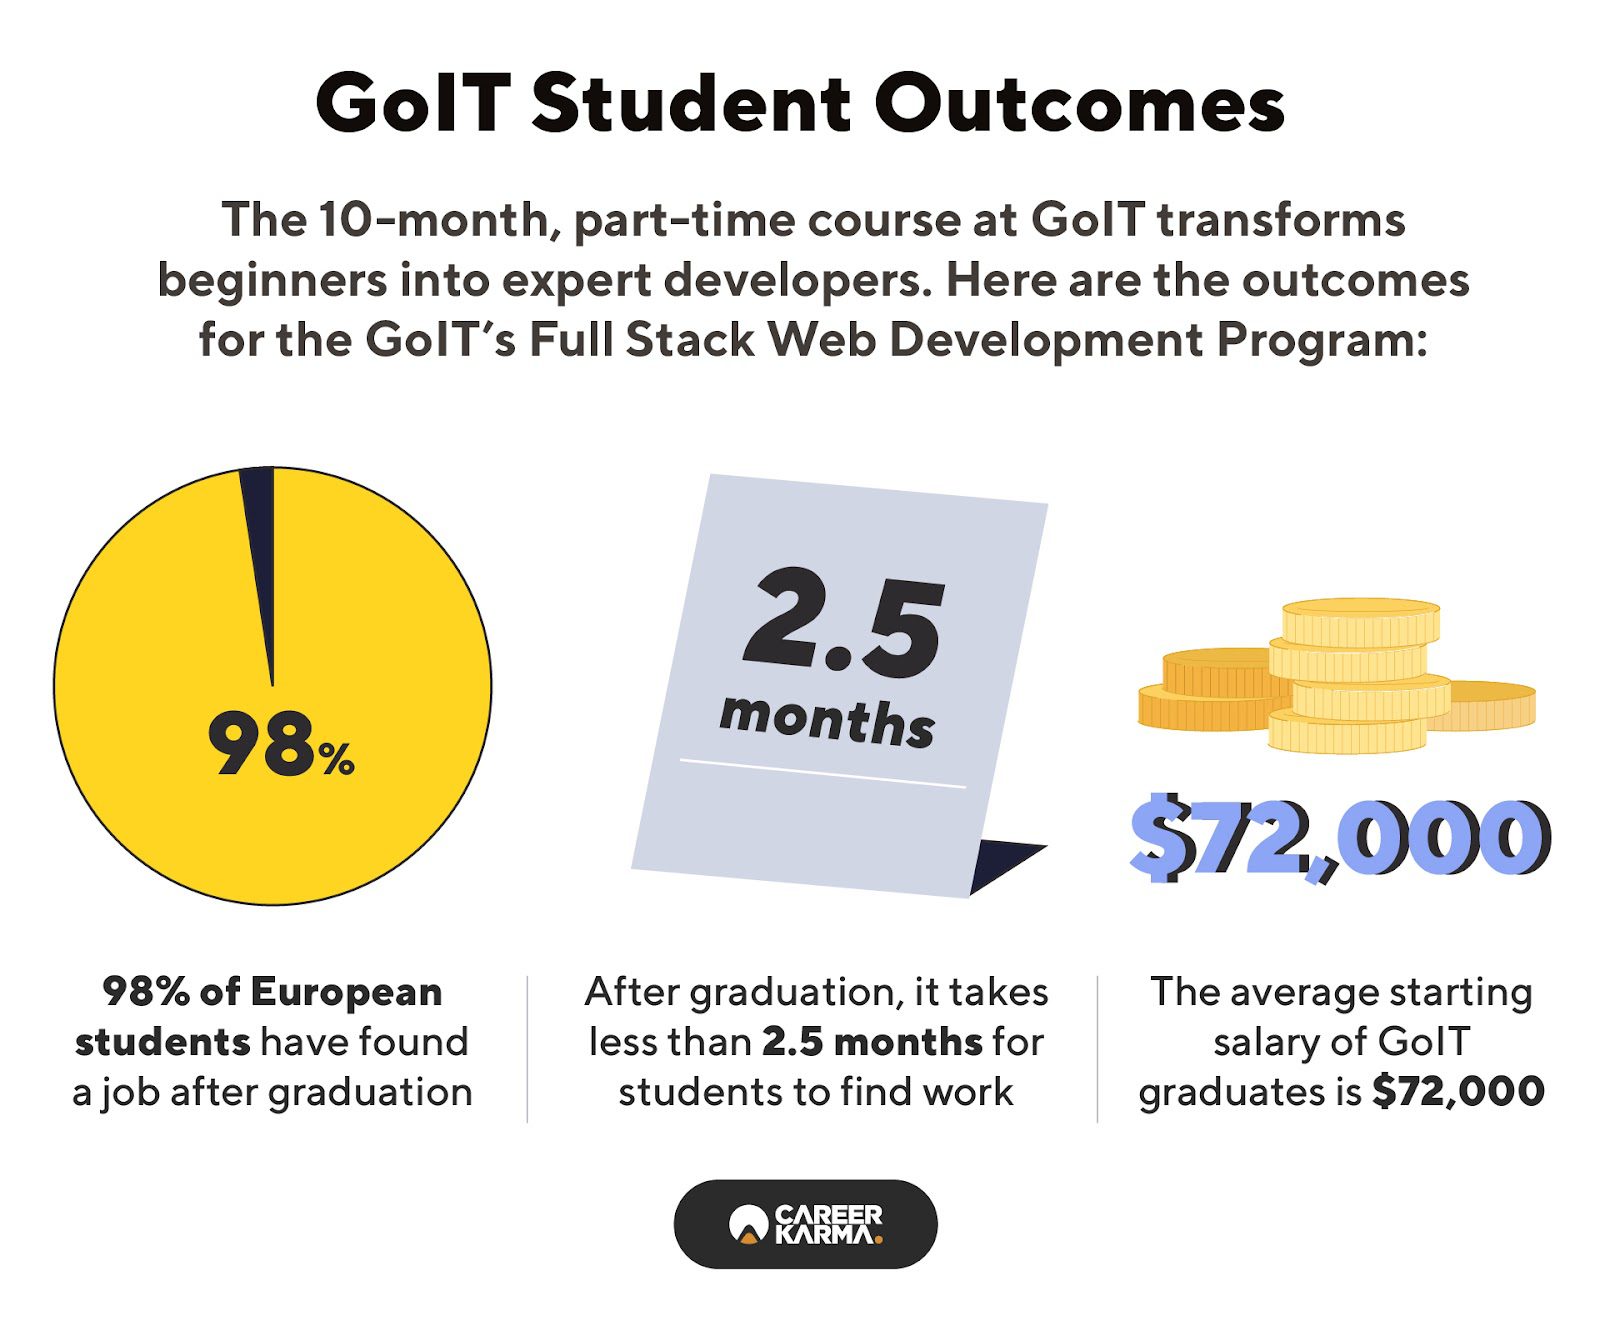 An infographic highlighting GoIT’s student outcomes